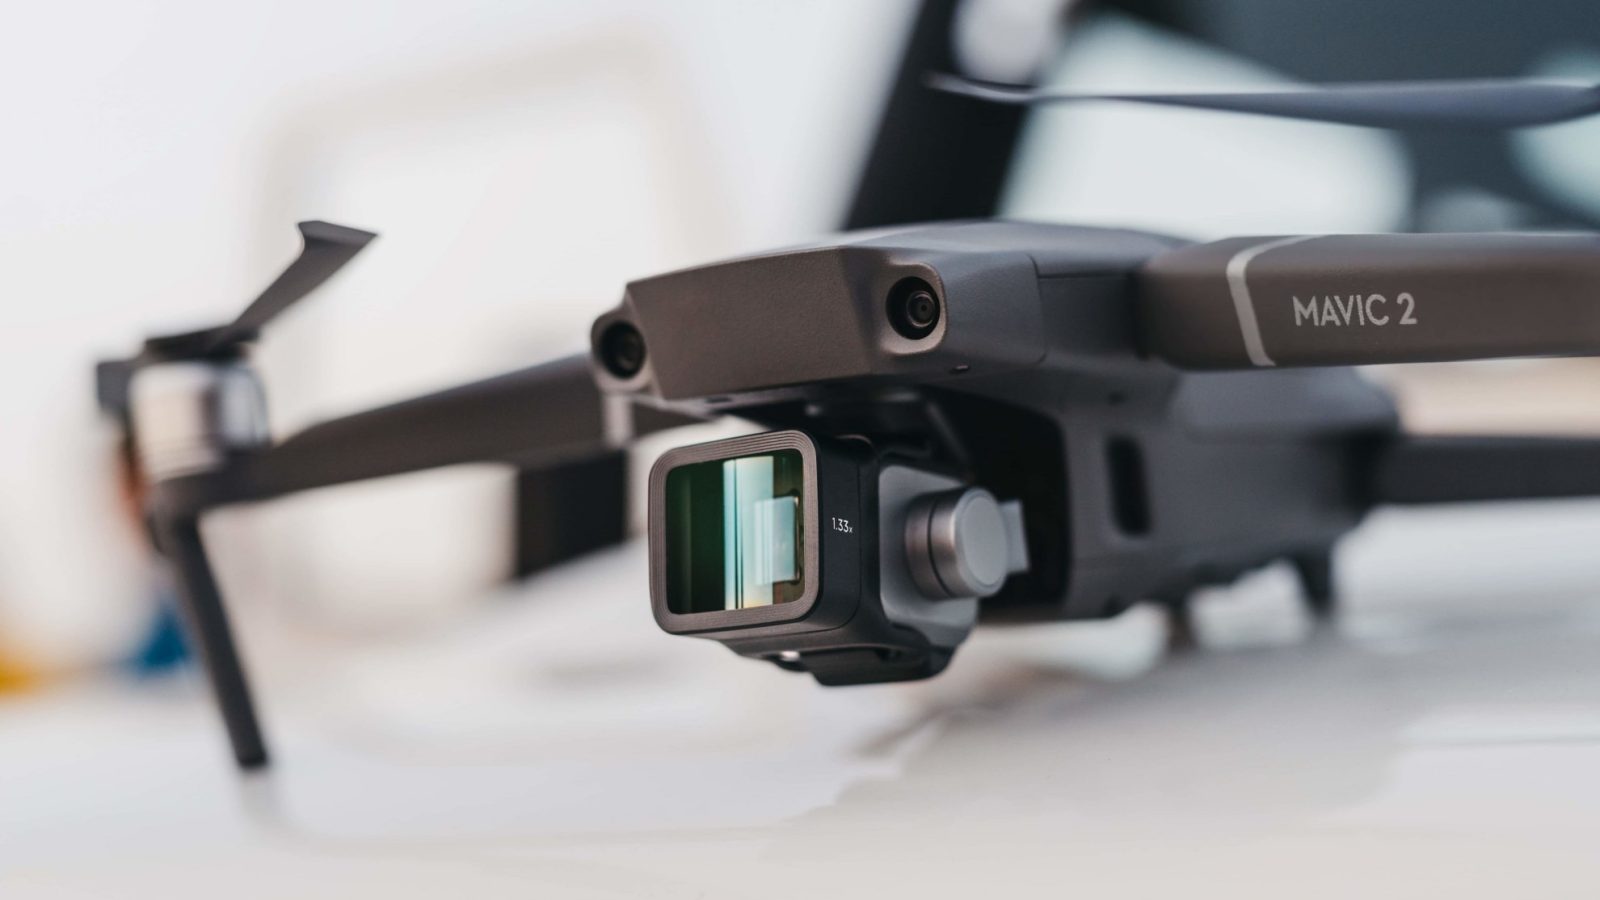 Moment Air introduces anamorphic lens, filters and cases for DJI Mavic 2